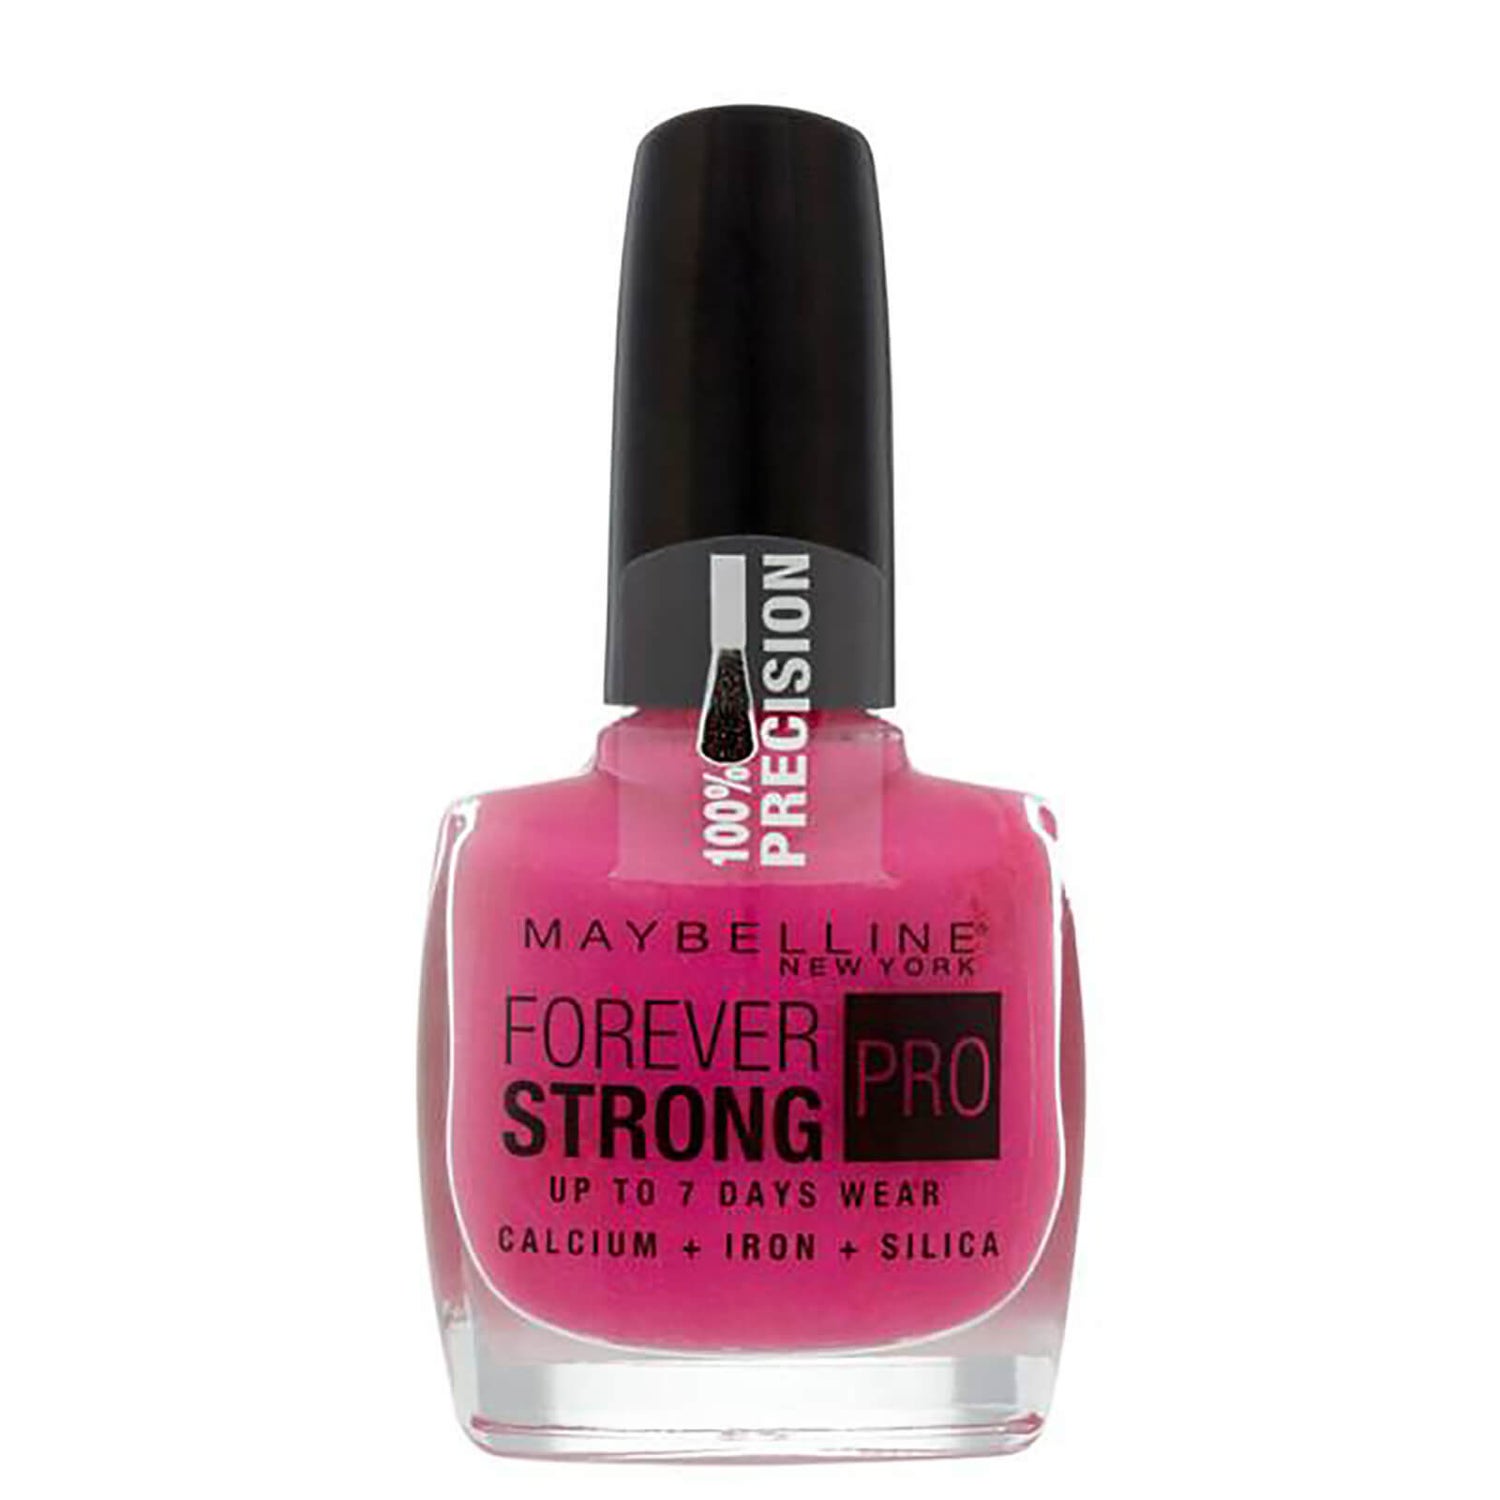 Maybelline New York Forever Strong Pro - 155 Bubble Gum (10ml)